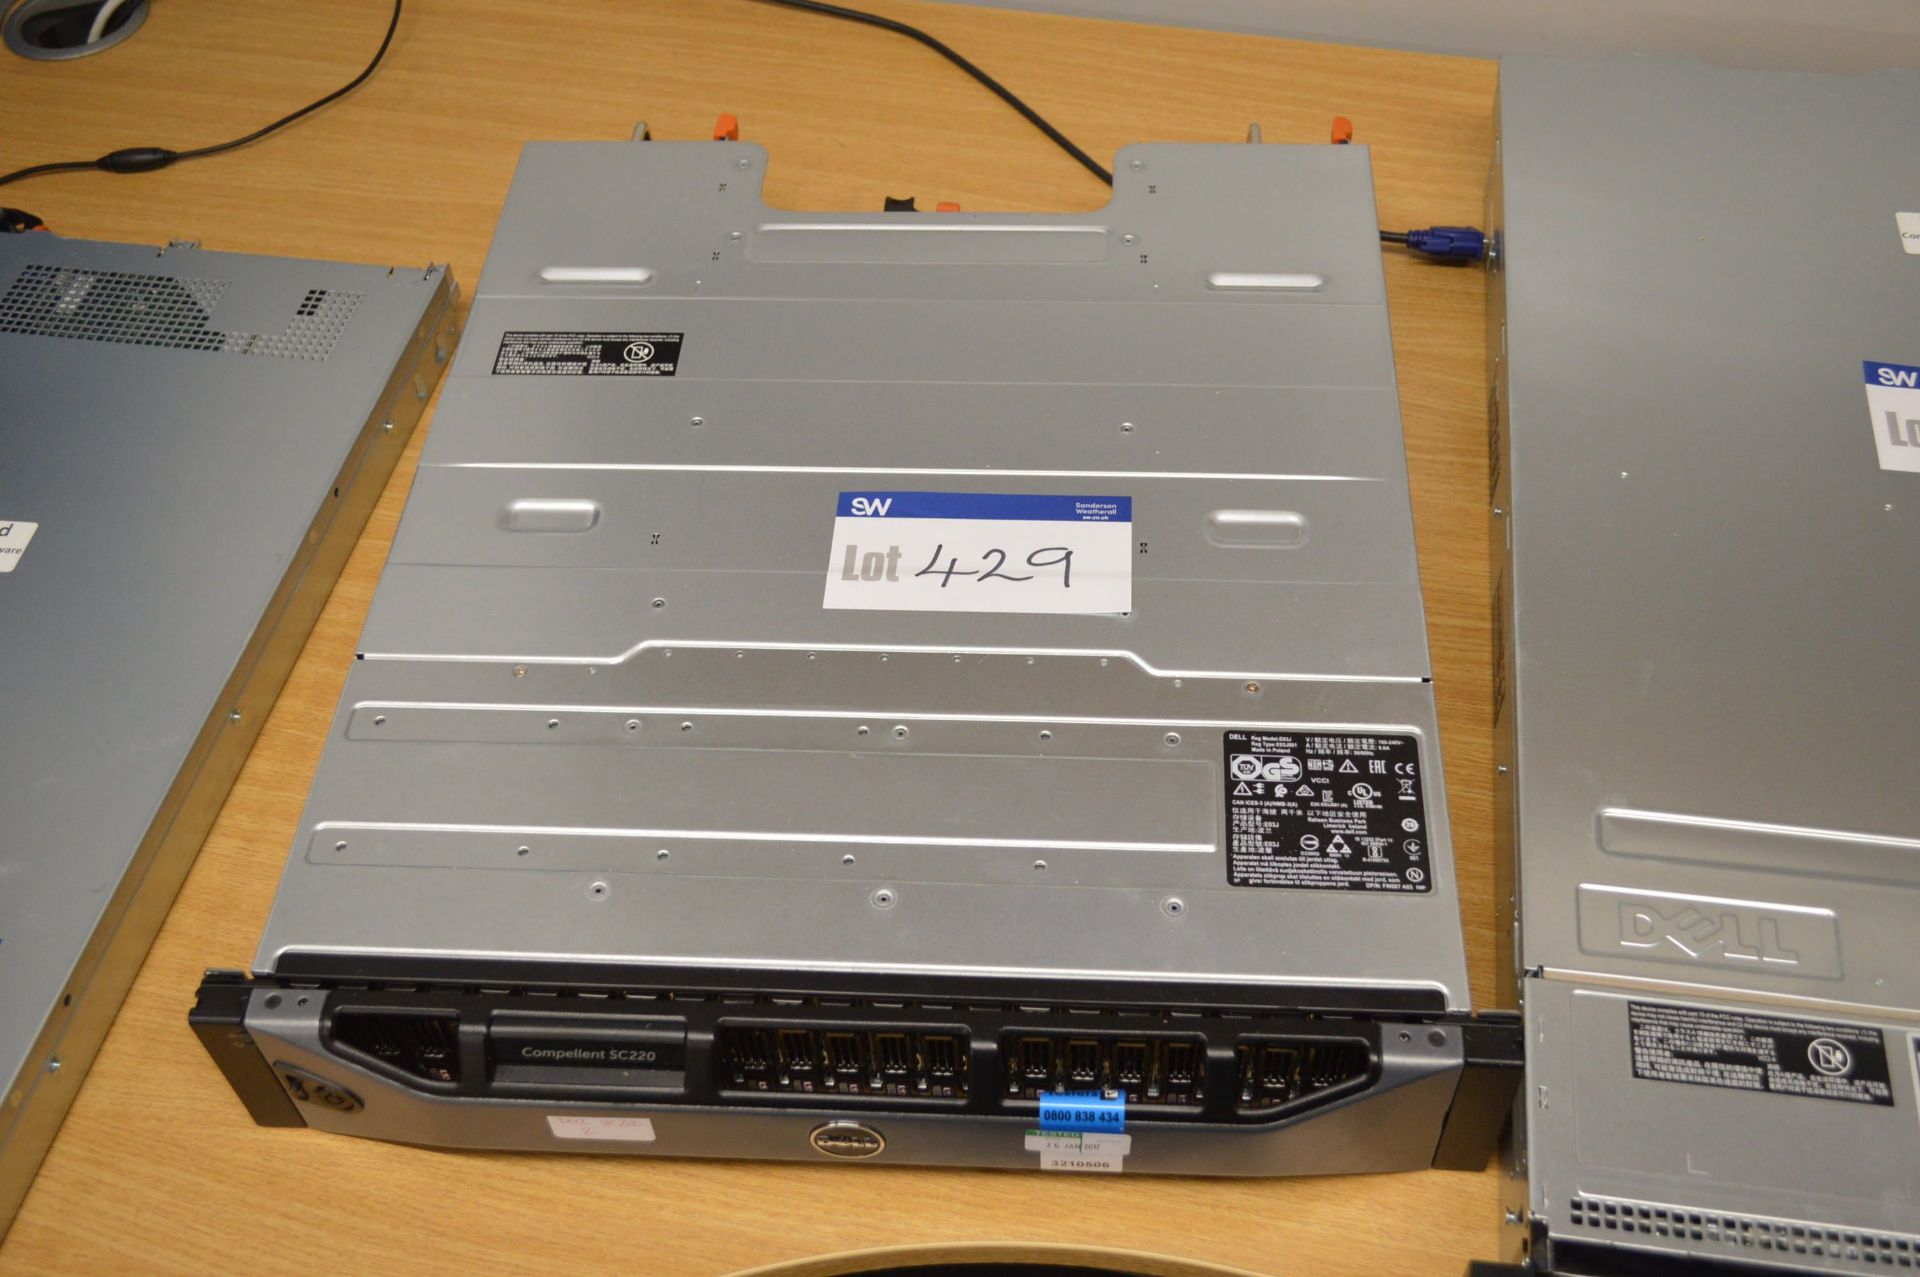 Dell Compellent SC220 Rack Mount Server, with 24 X 1.92TB SSD cards (kindly offered for sale on